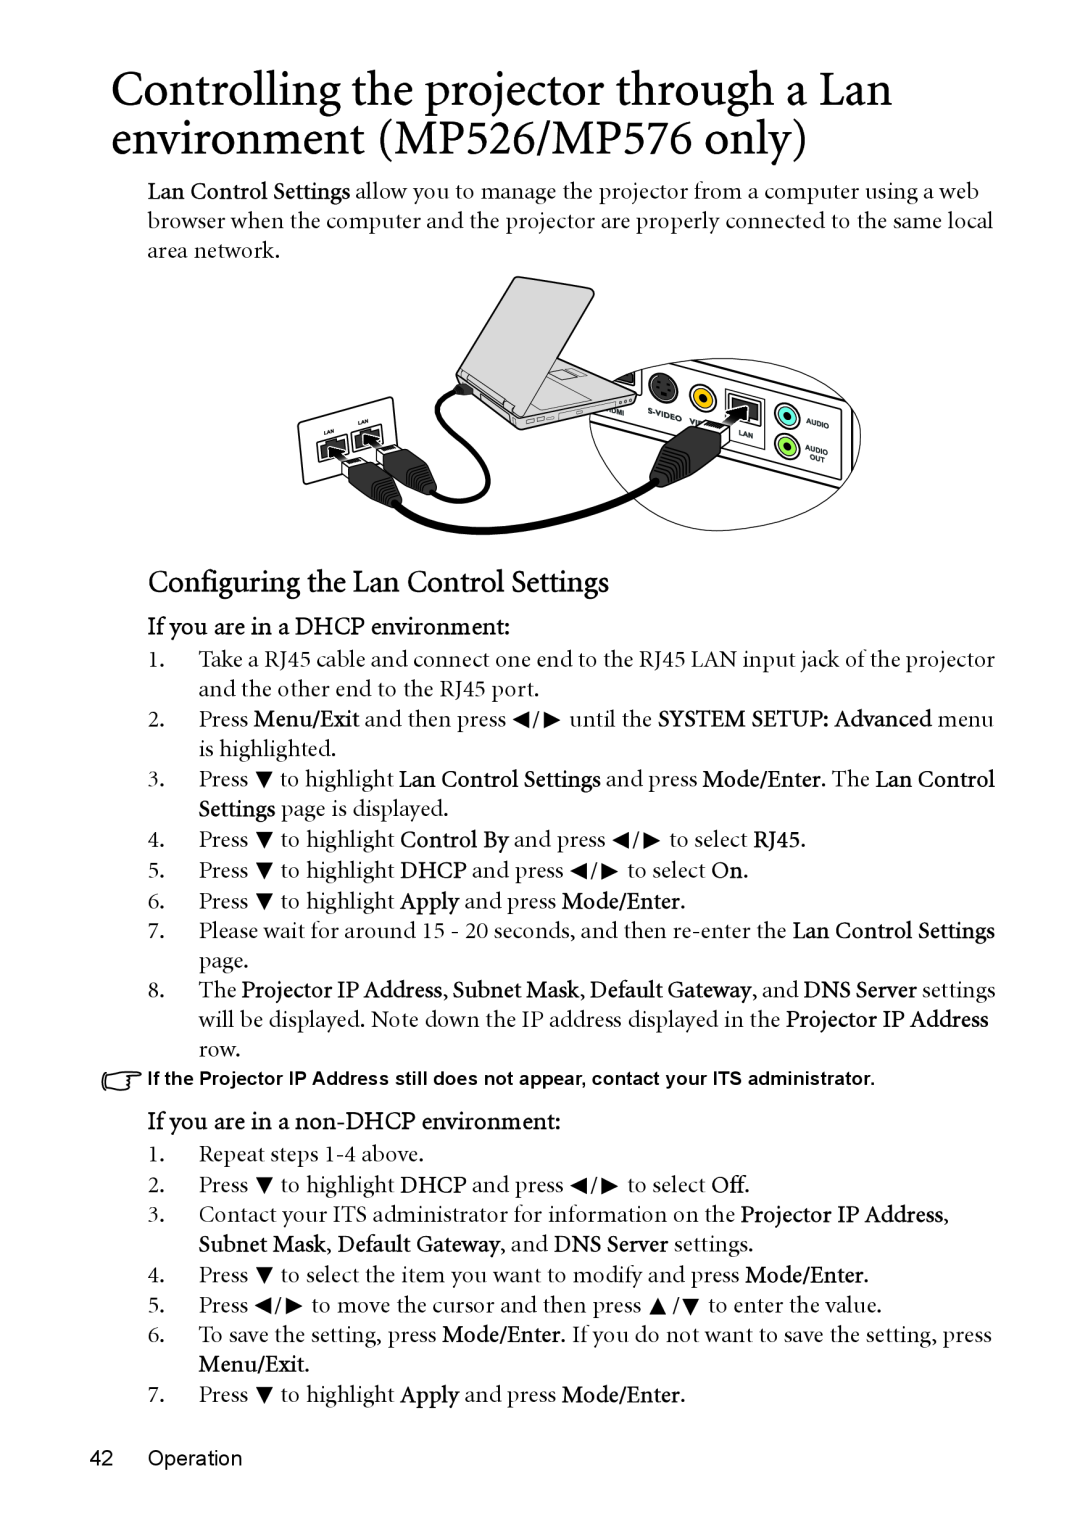 BenQ MP525P Controlling the projector through a Lan environment MP526/MP576 only, Configuring the Lan Control Settings 